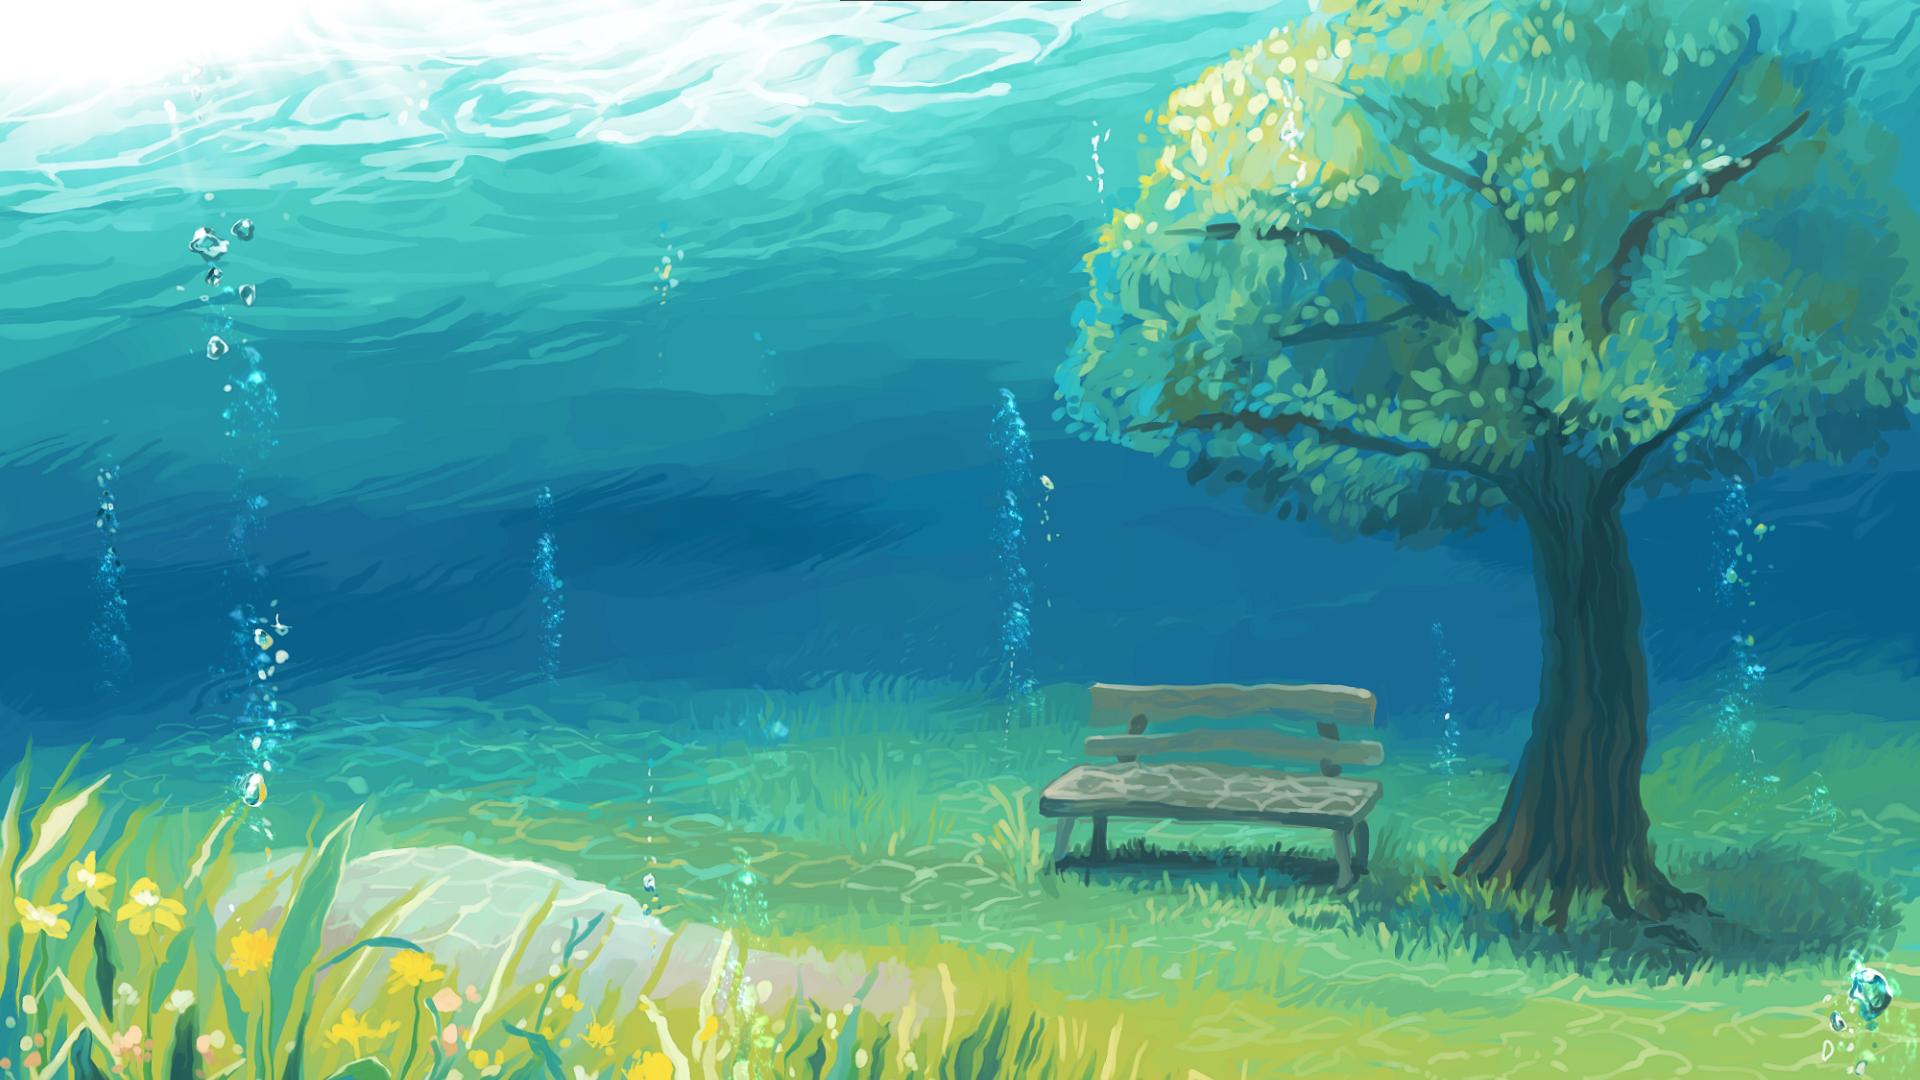 General 1920x1080 underwater bench artwork digital art bubbles bright trees leaves water grass